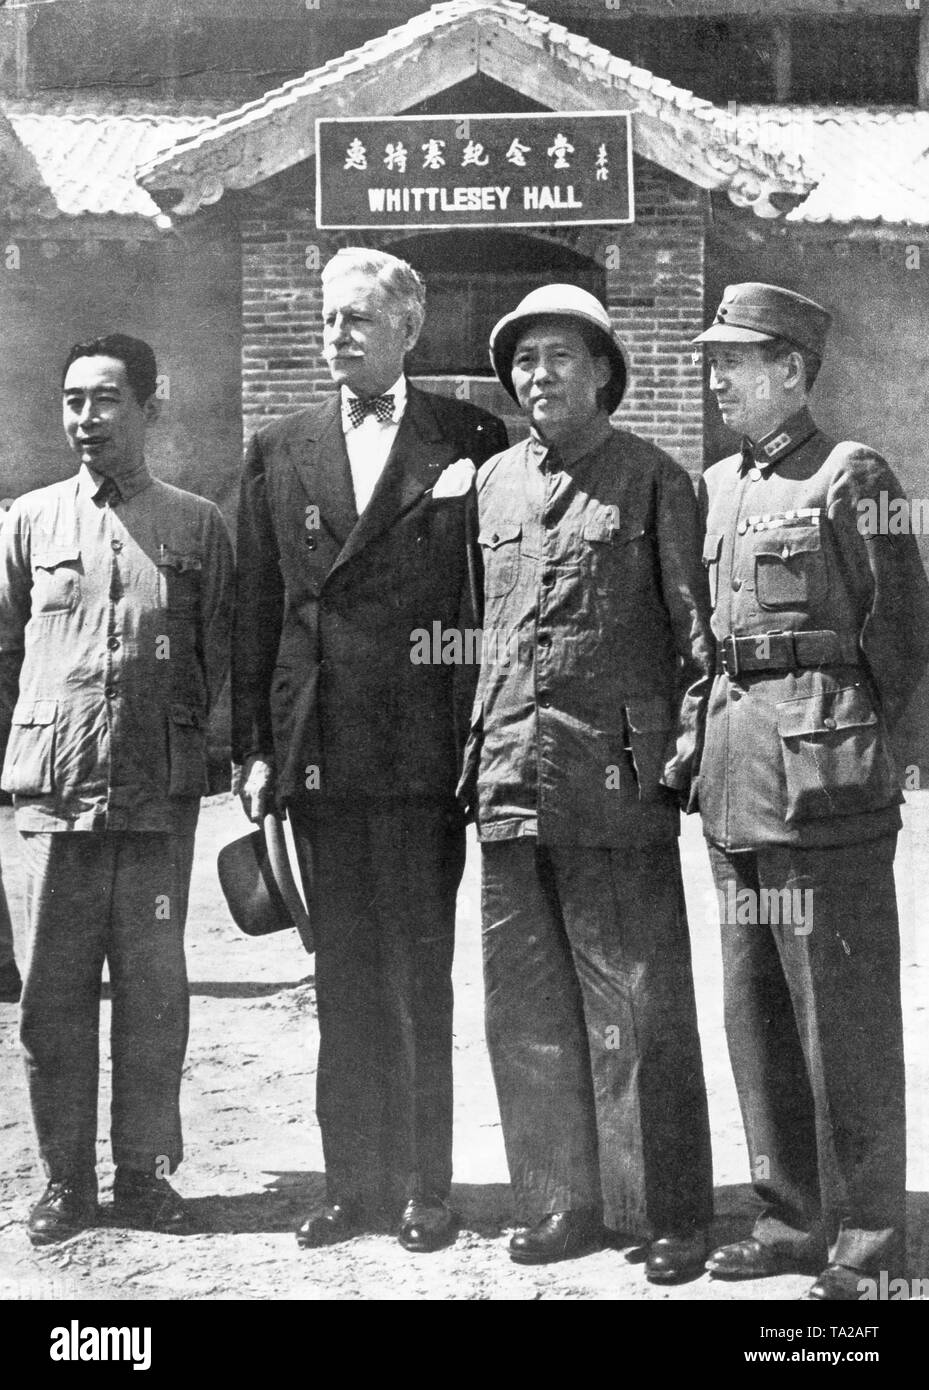 The American Ambassador Hurley at the Mao headquarters  in Yenan after the figts ended in China. From left to right: Mao's closest colleague Chou en Lai, American Ambassador Patrick Hurley, Mao Zedong and Leador of the Chinese National Party Chiang Ching Stock Photo